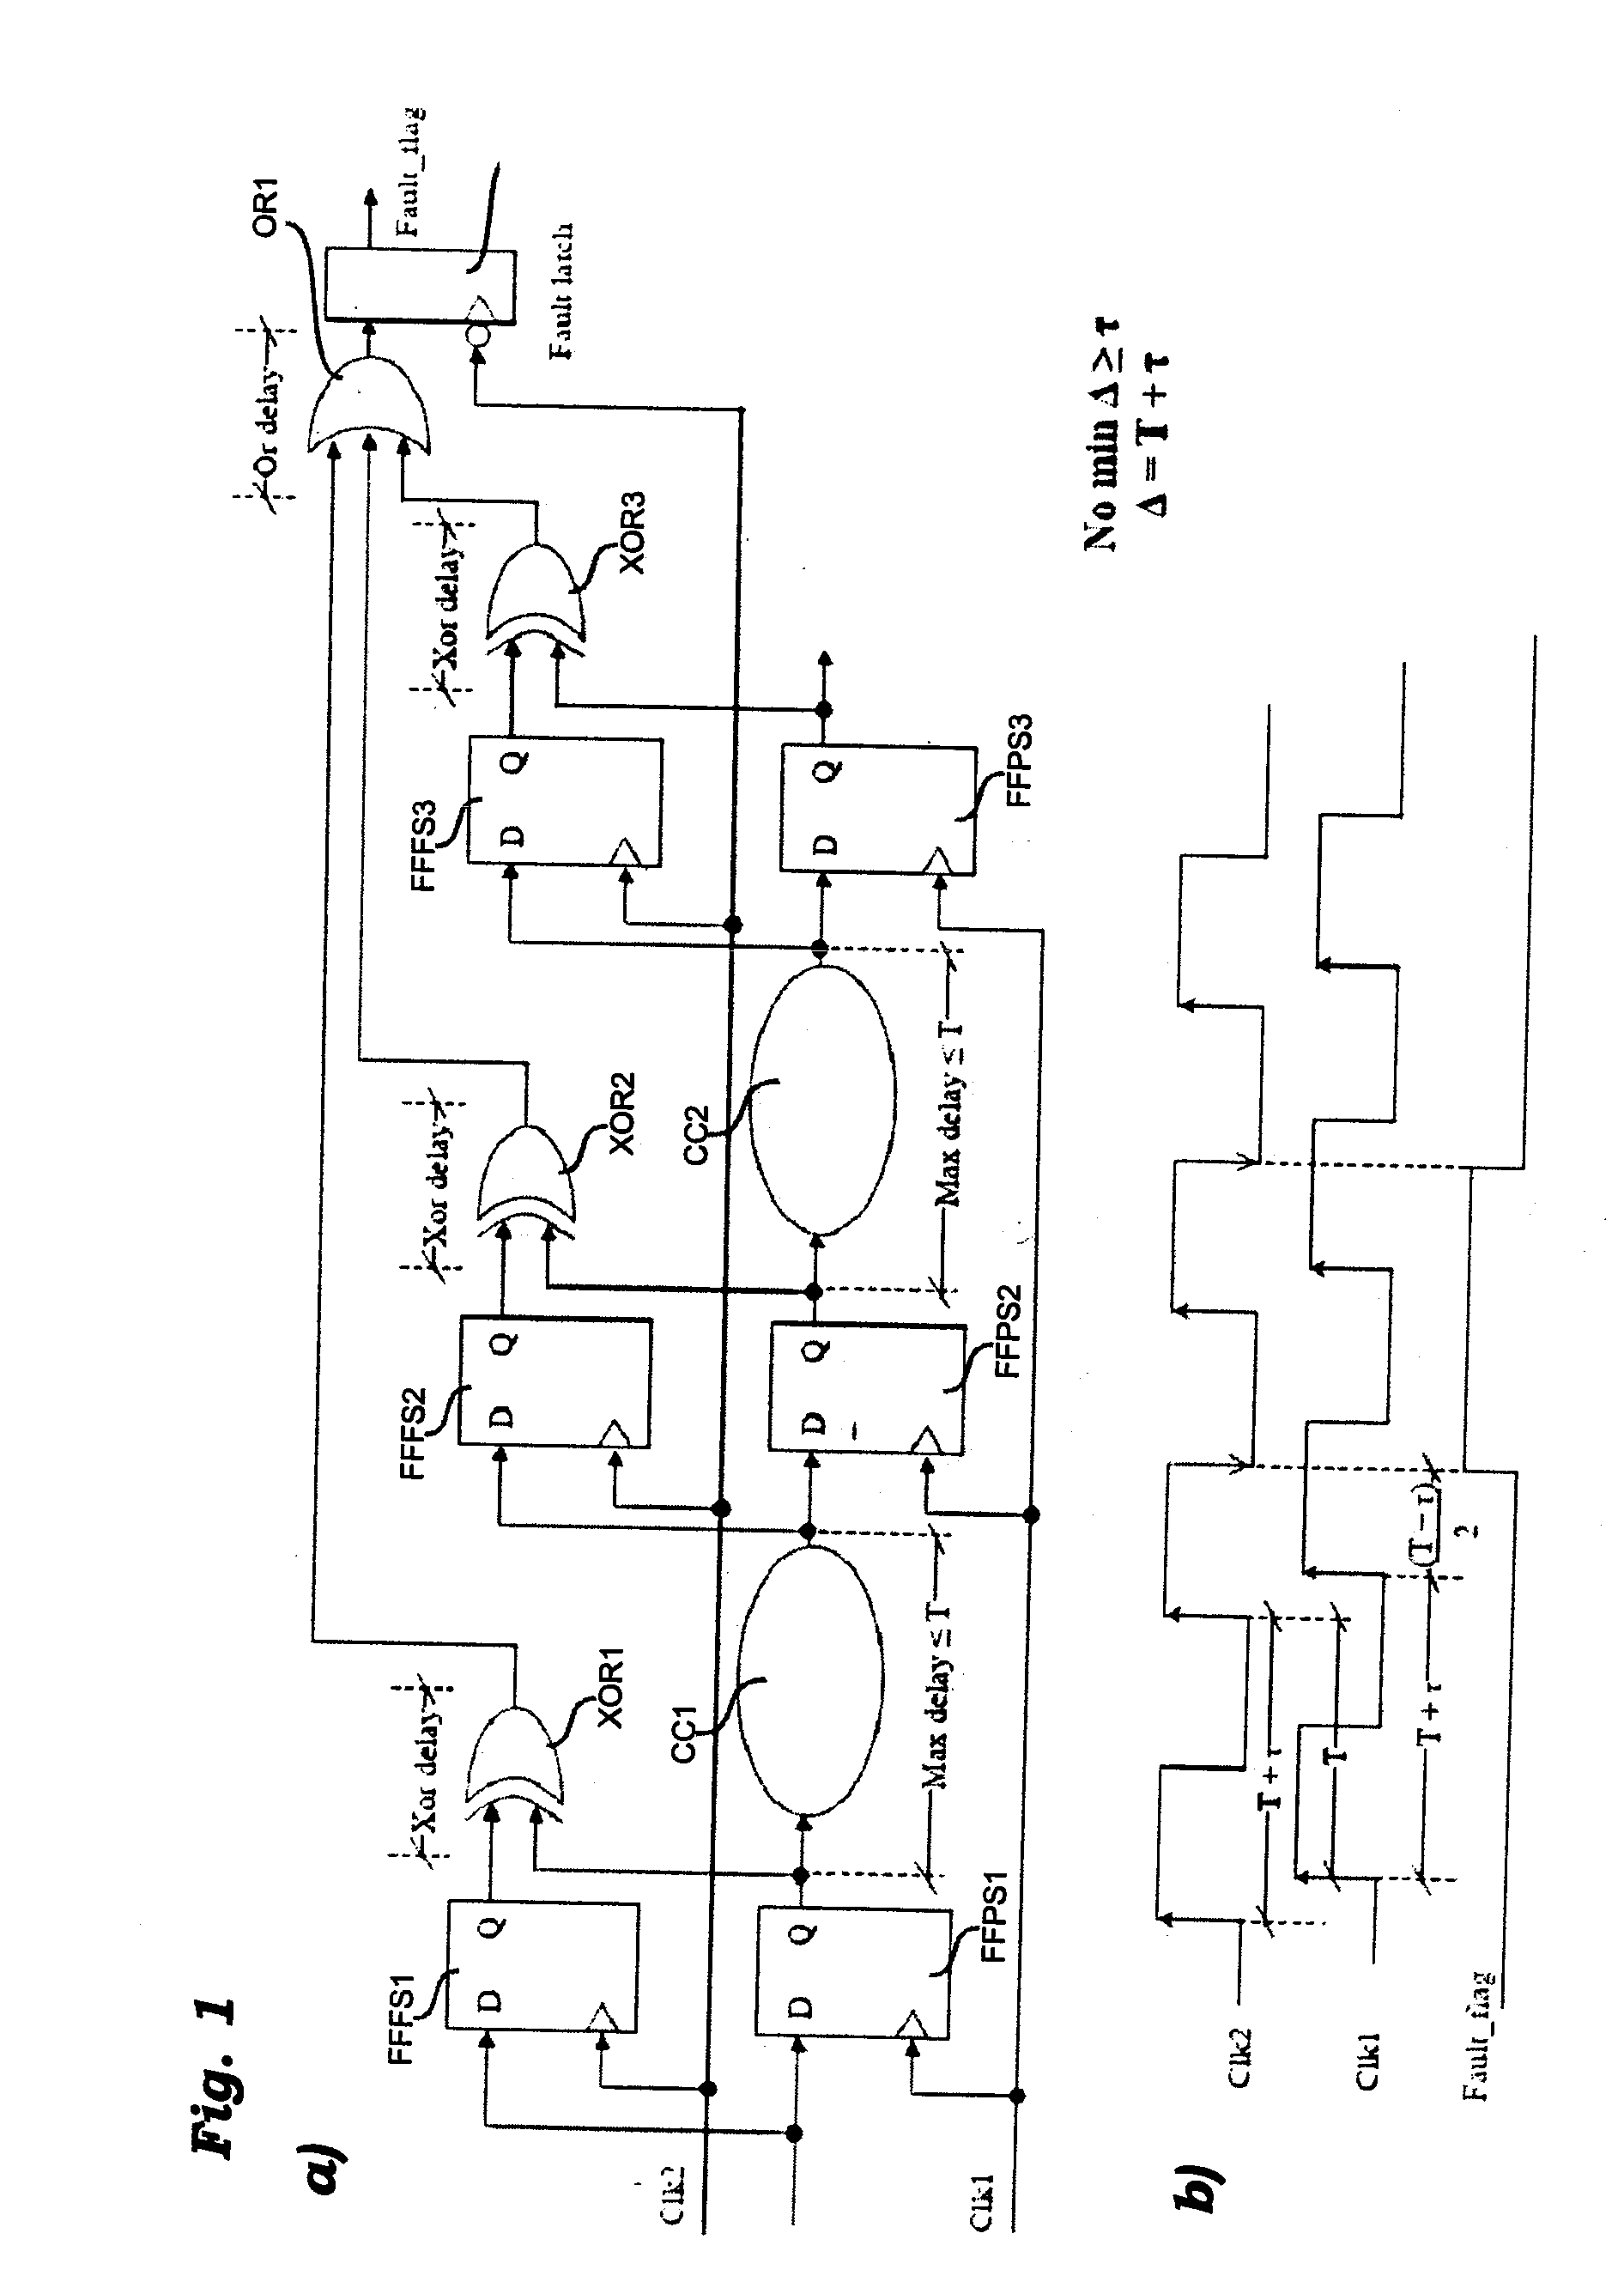 System for detecting operating errors in integrated circuits